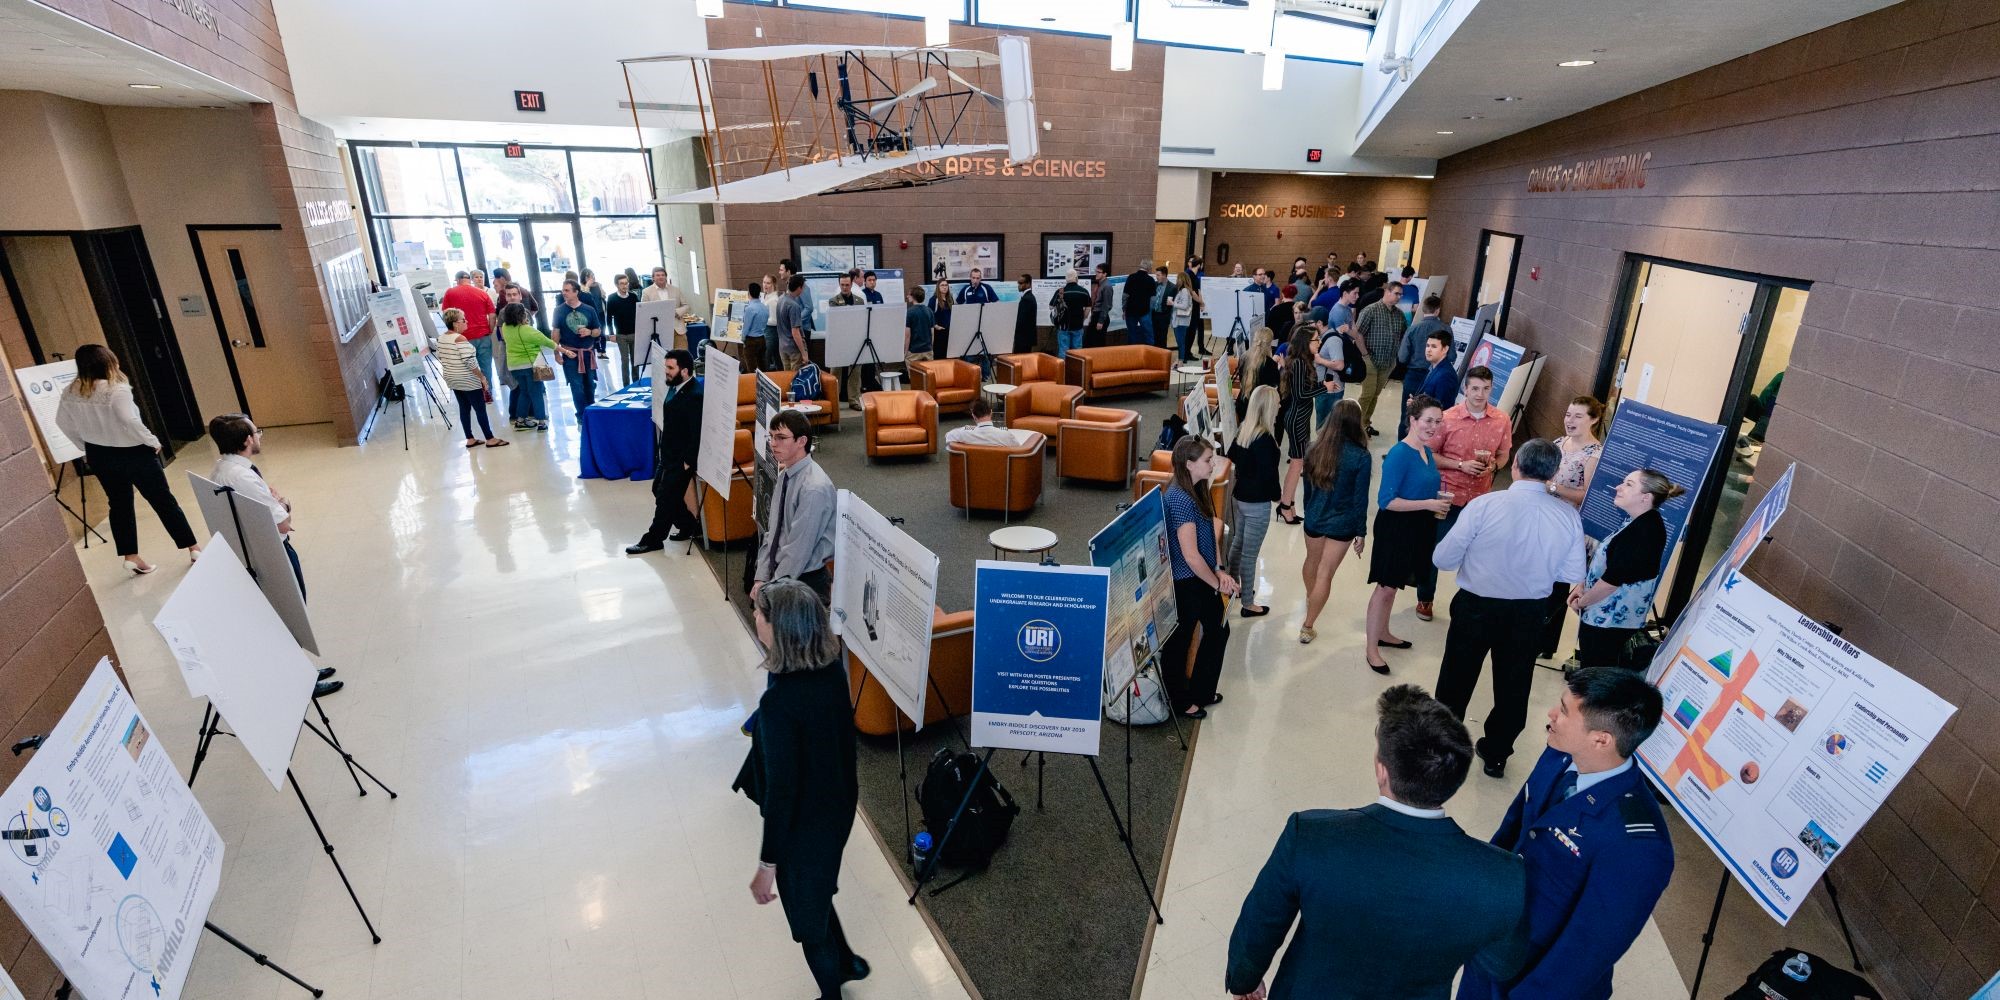 Students gather to present their research during Discovery Day, a celebration of undergraduate research and scholarship from aviation to engineering, security and intelligence to physics and astronomy. (Photo: Embry-Riddle / Connor McShane)